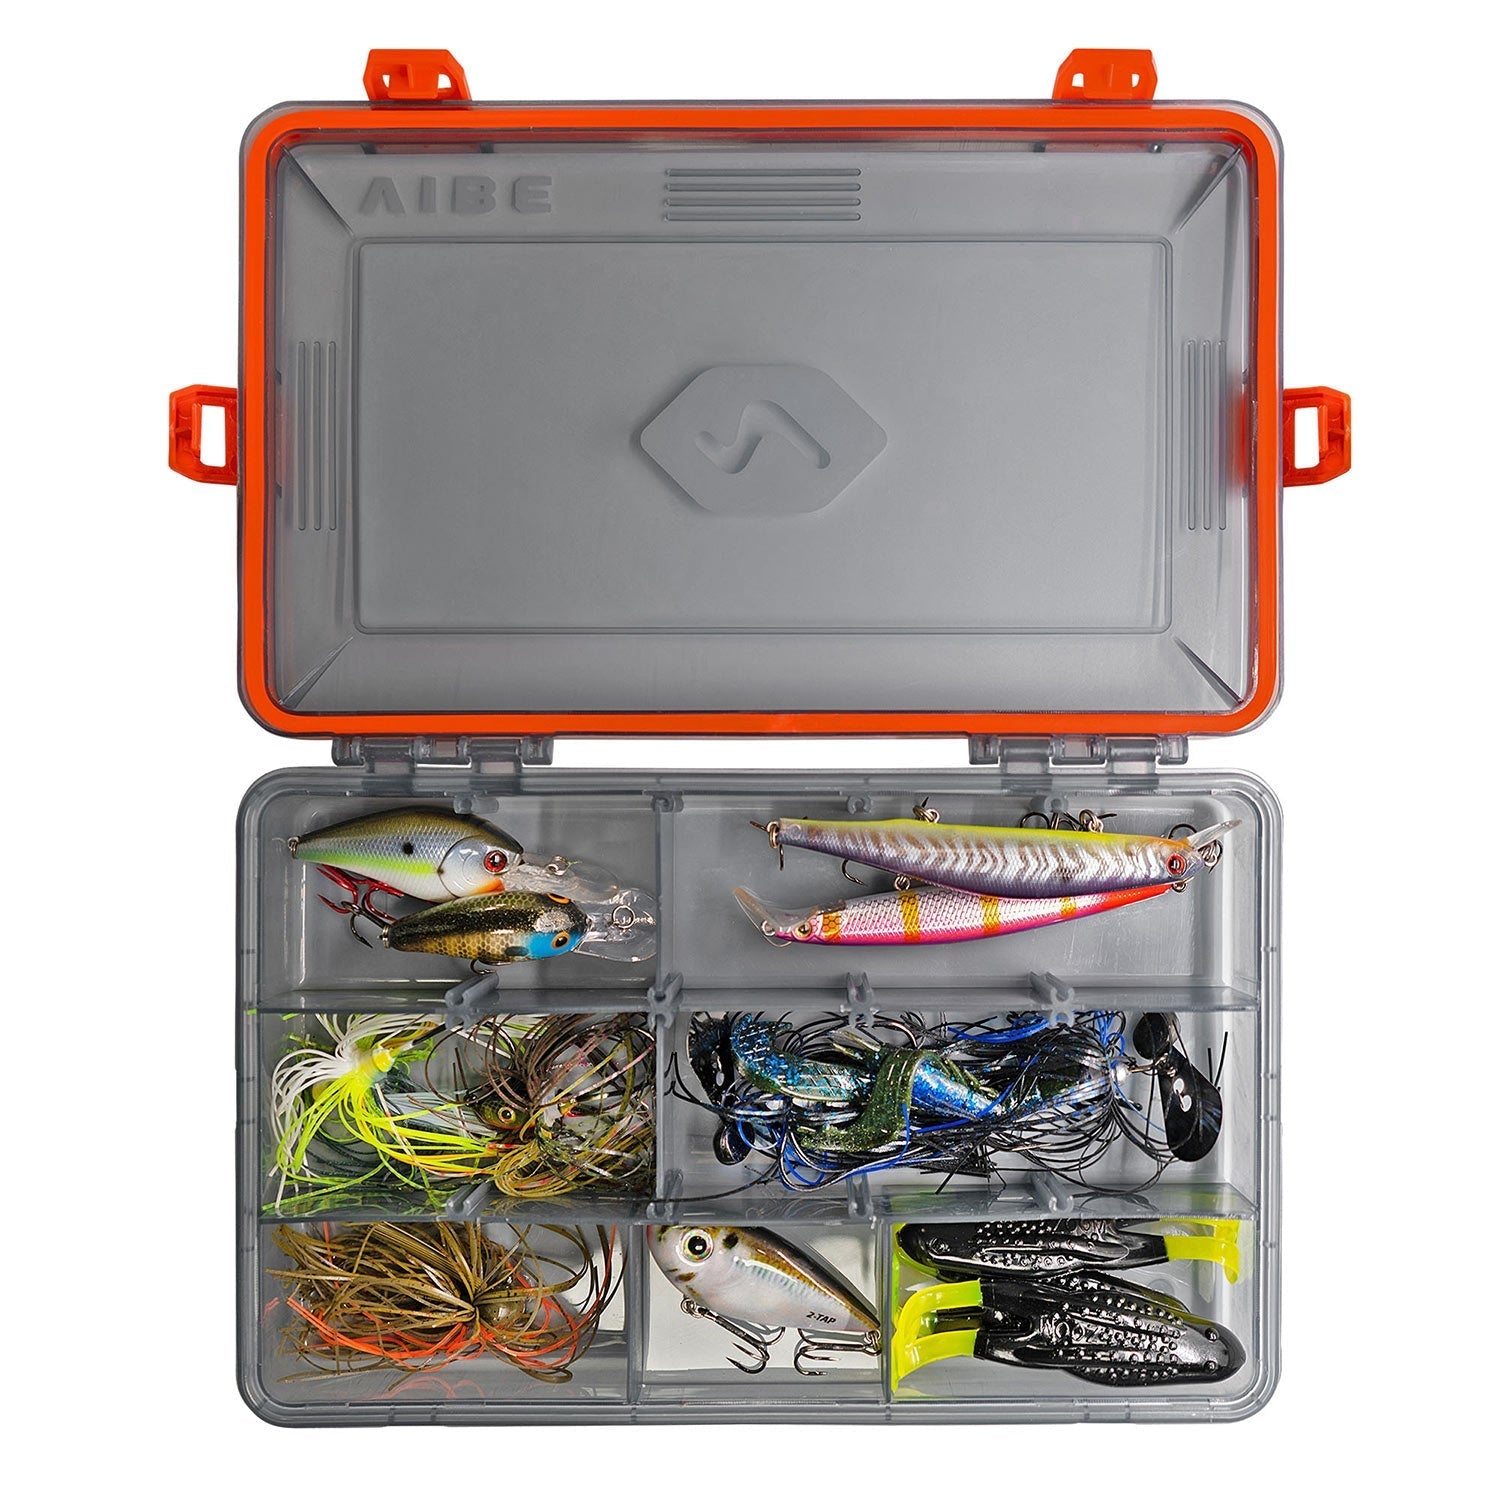 Packout Tackle Box Bundle Packout Fishing Tackle Box Insert